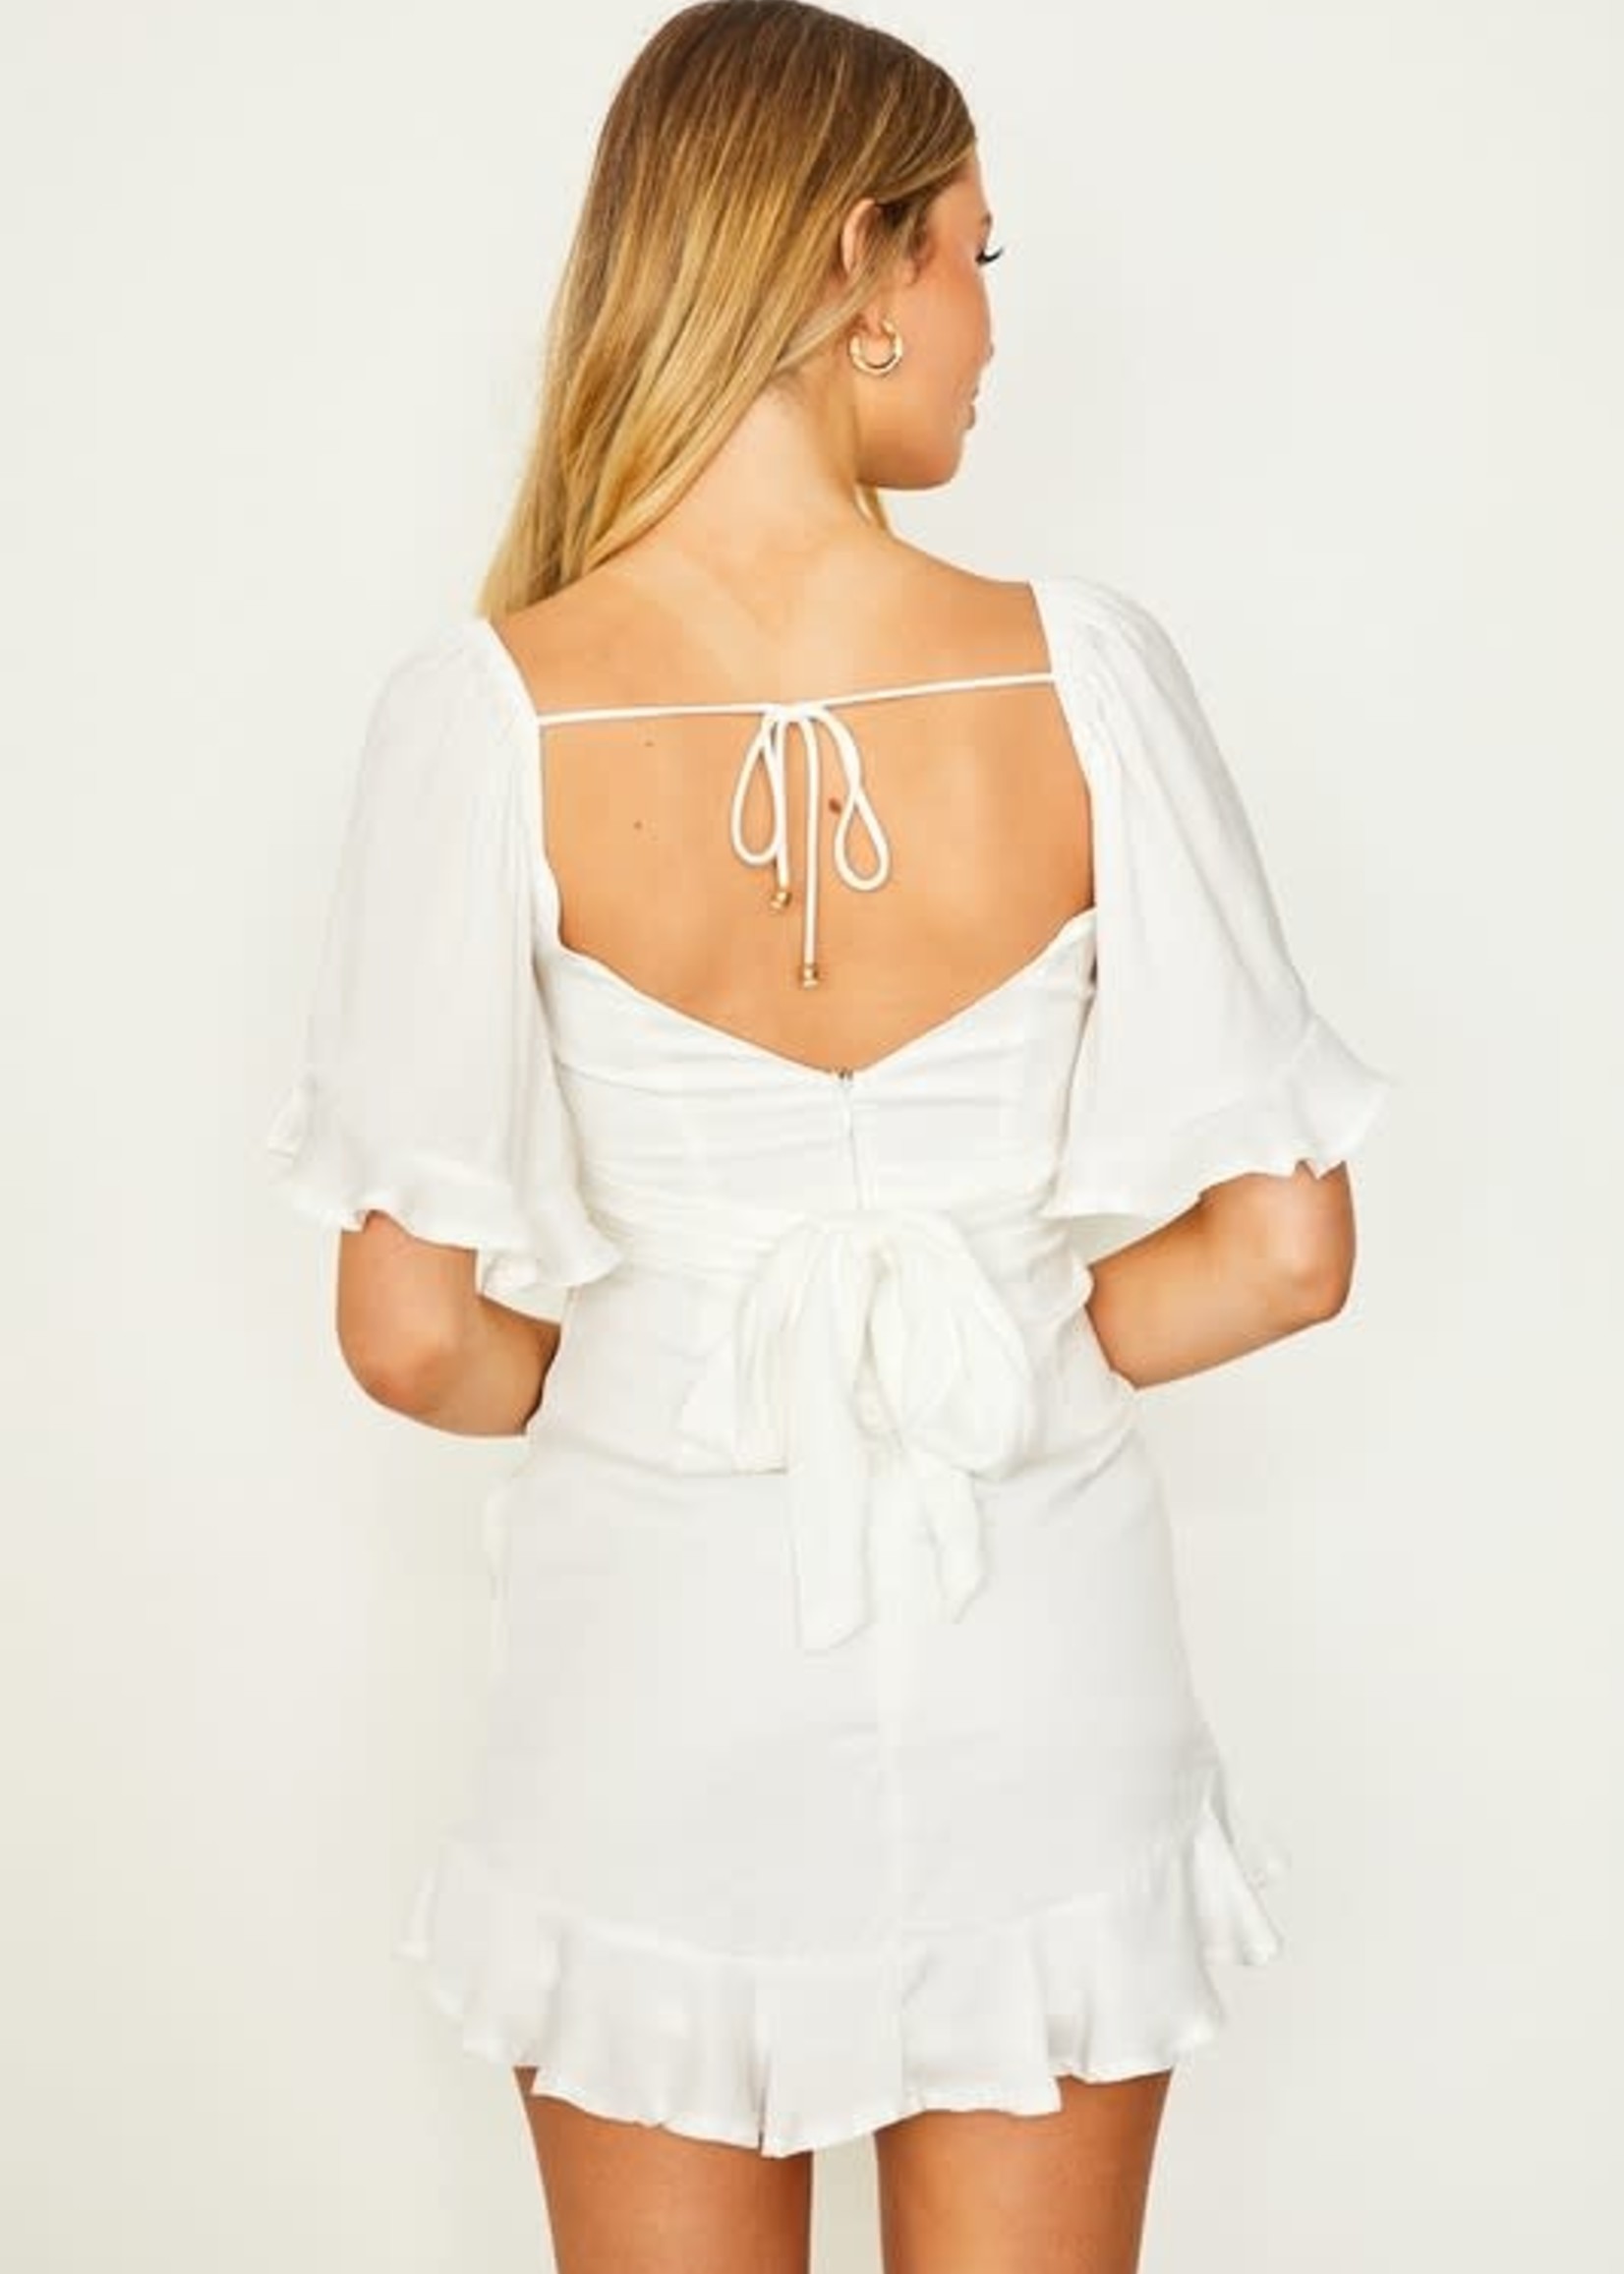 The White Occassion Ruffle Dress